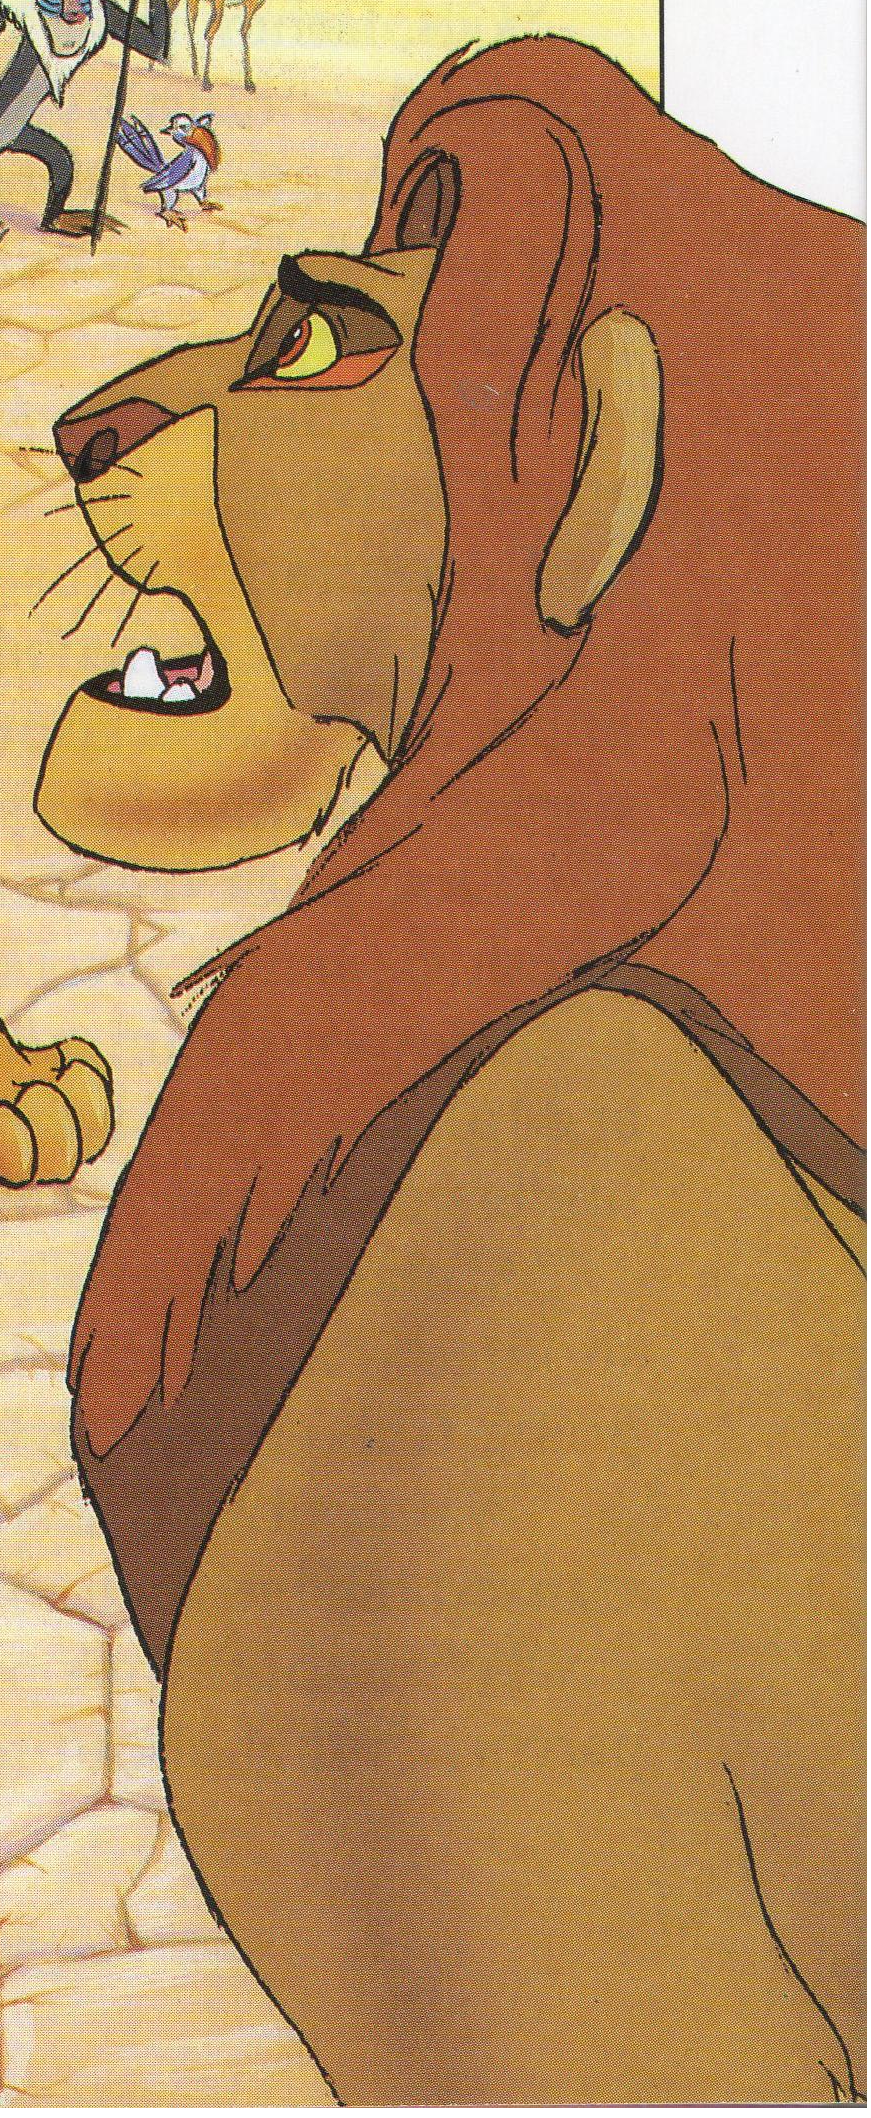 http://images3.wikia.nocookie.net/__cb20100319154003/lionking/images/a/a4/Ahadi2.png